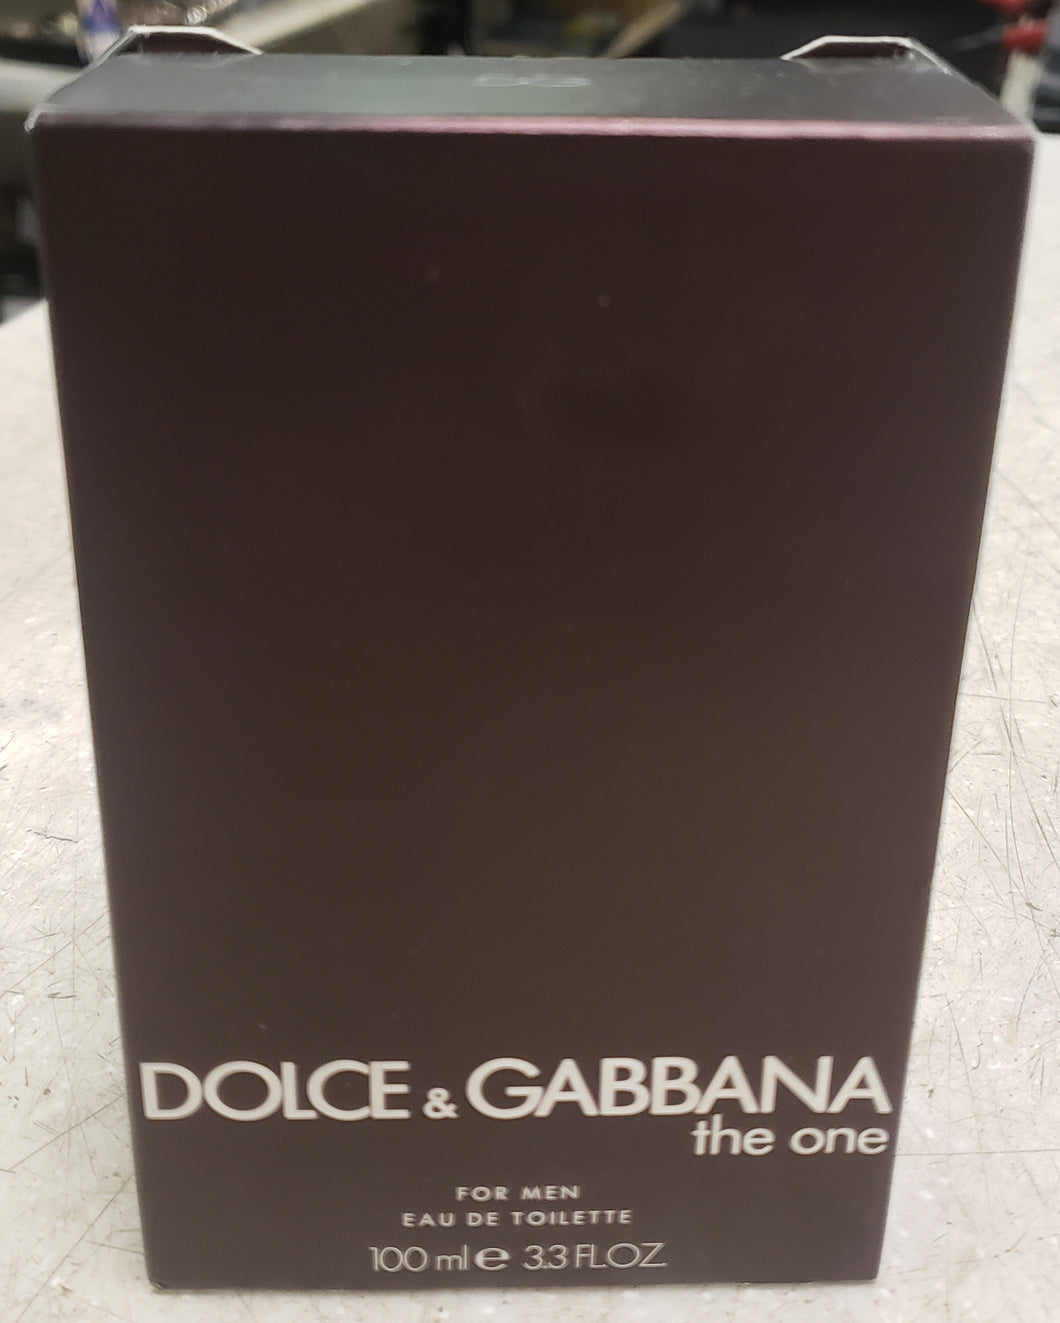 Dolce Gabbana The One for Men 3.3 oz